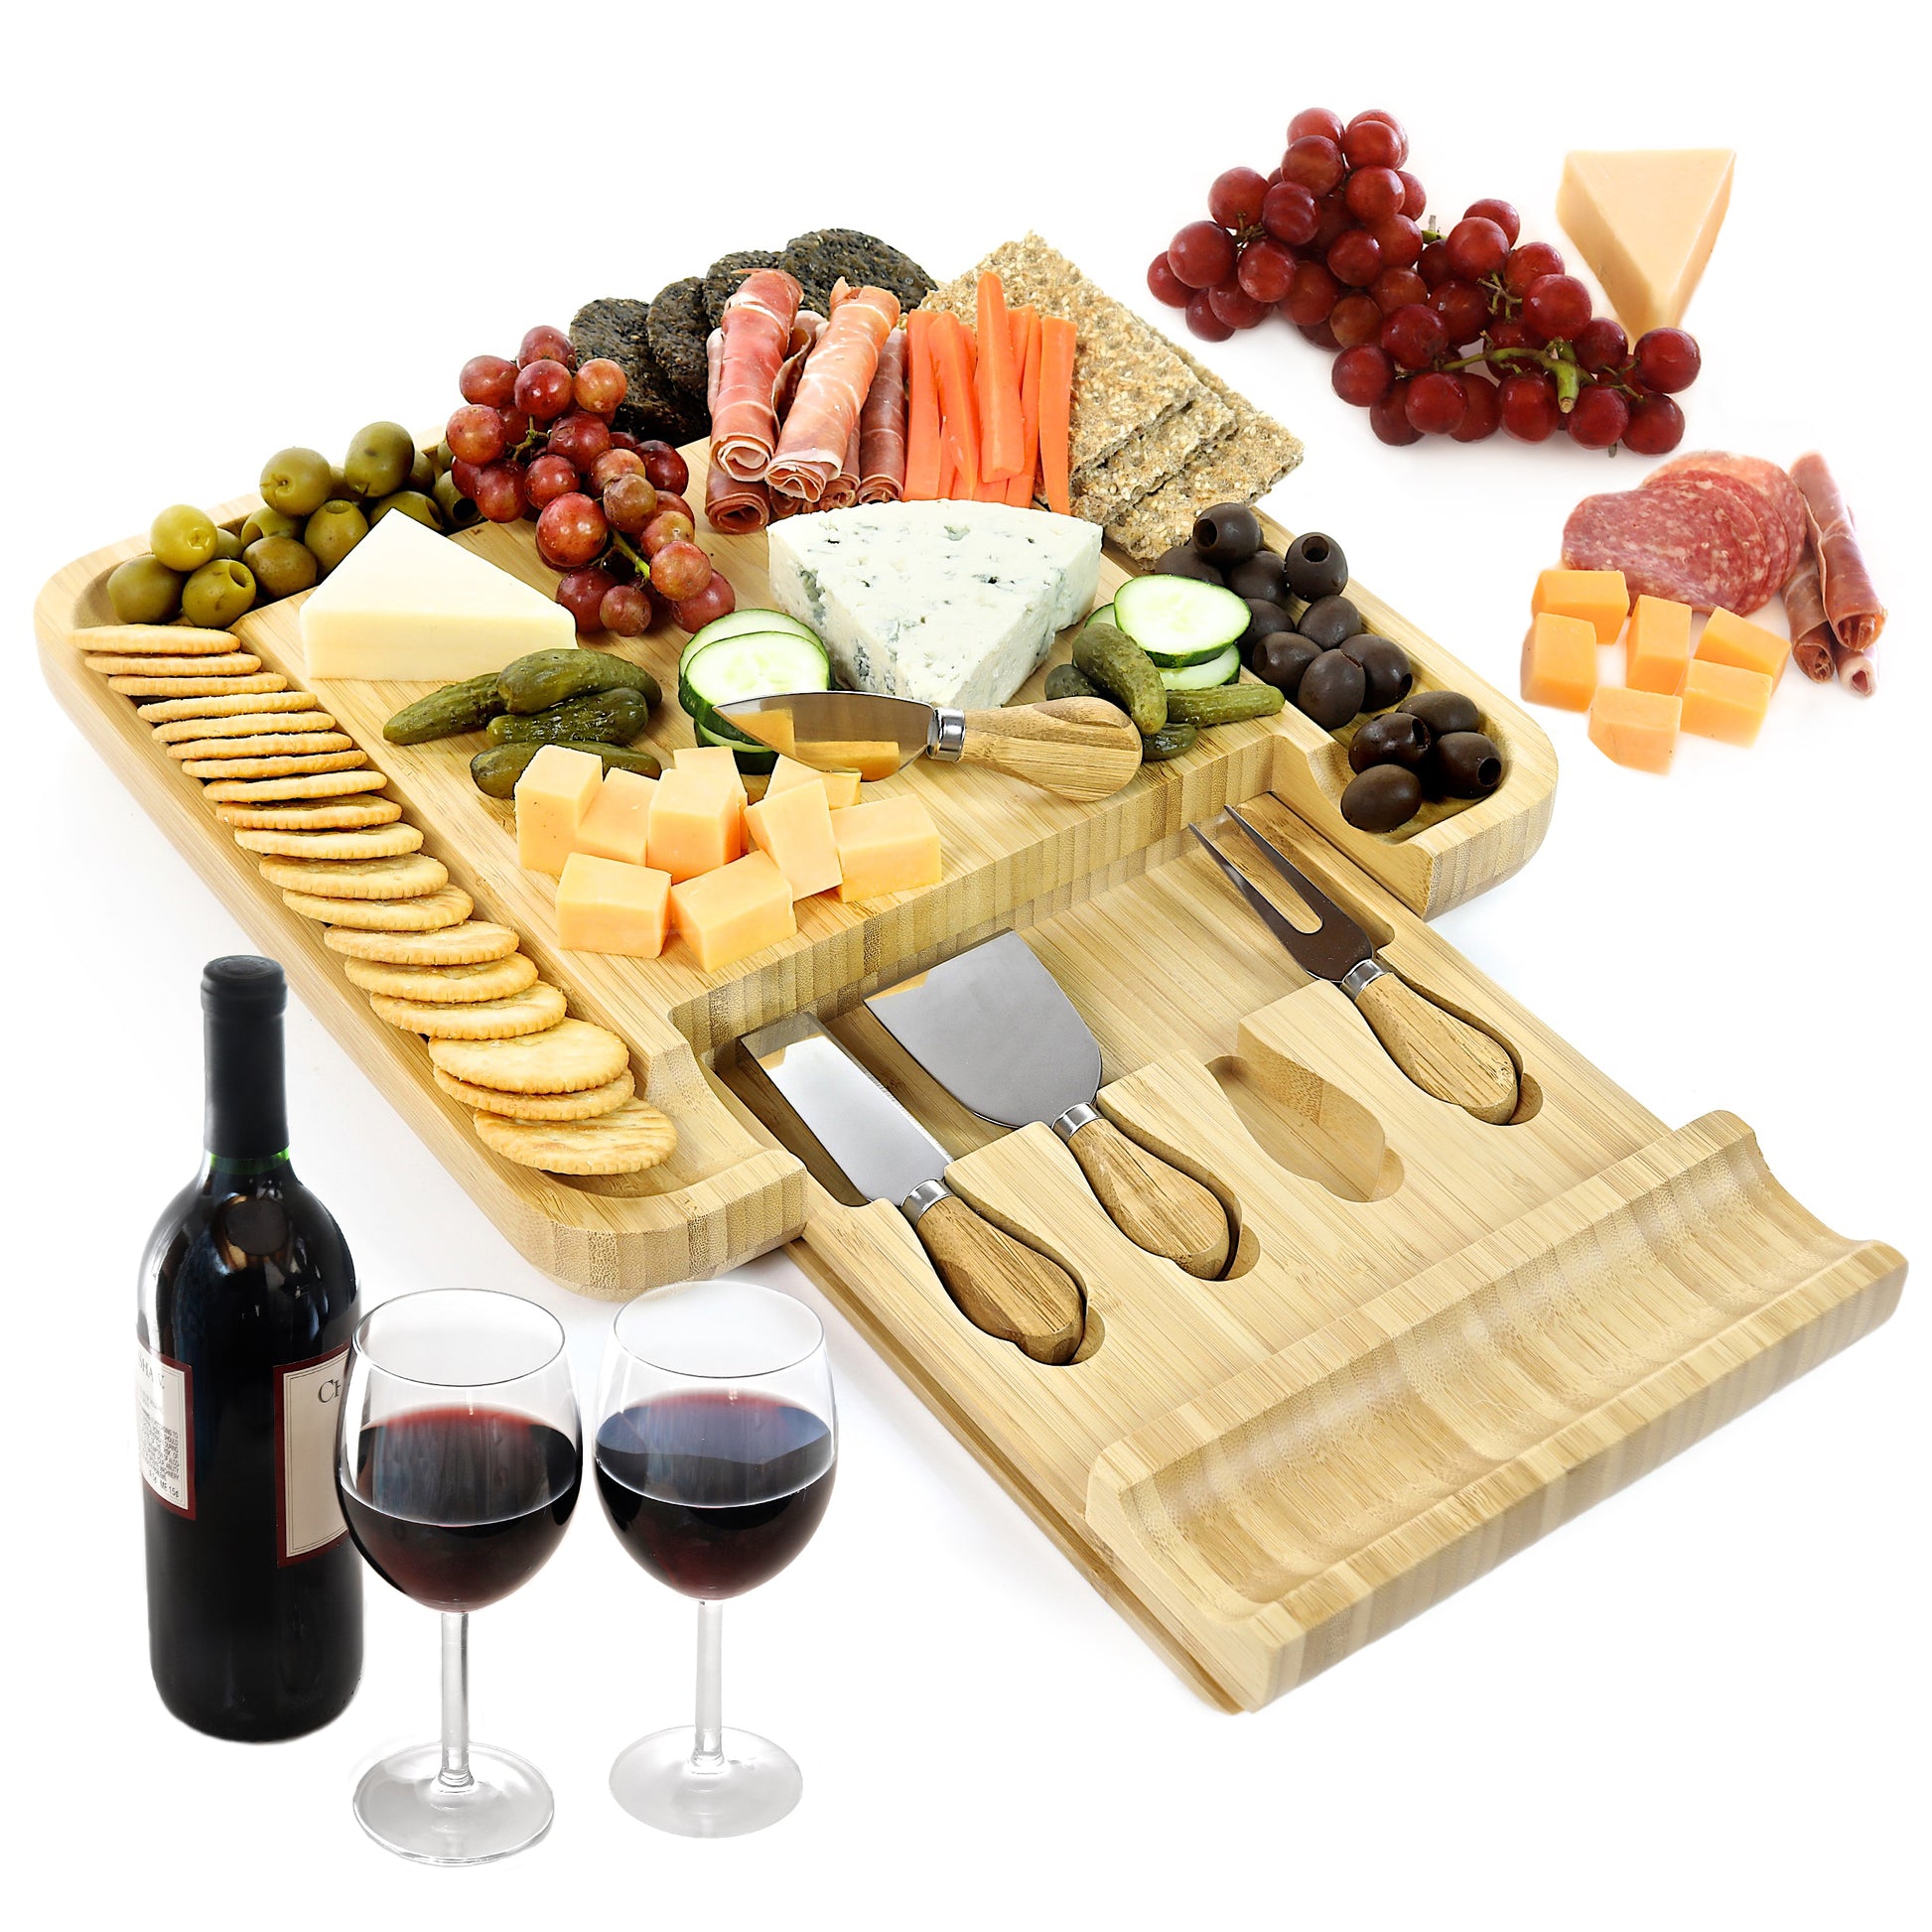 Cheese and Charcuterie Board Gift Set with Cheese Knives - Vistal Supply 